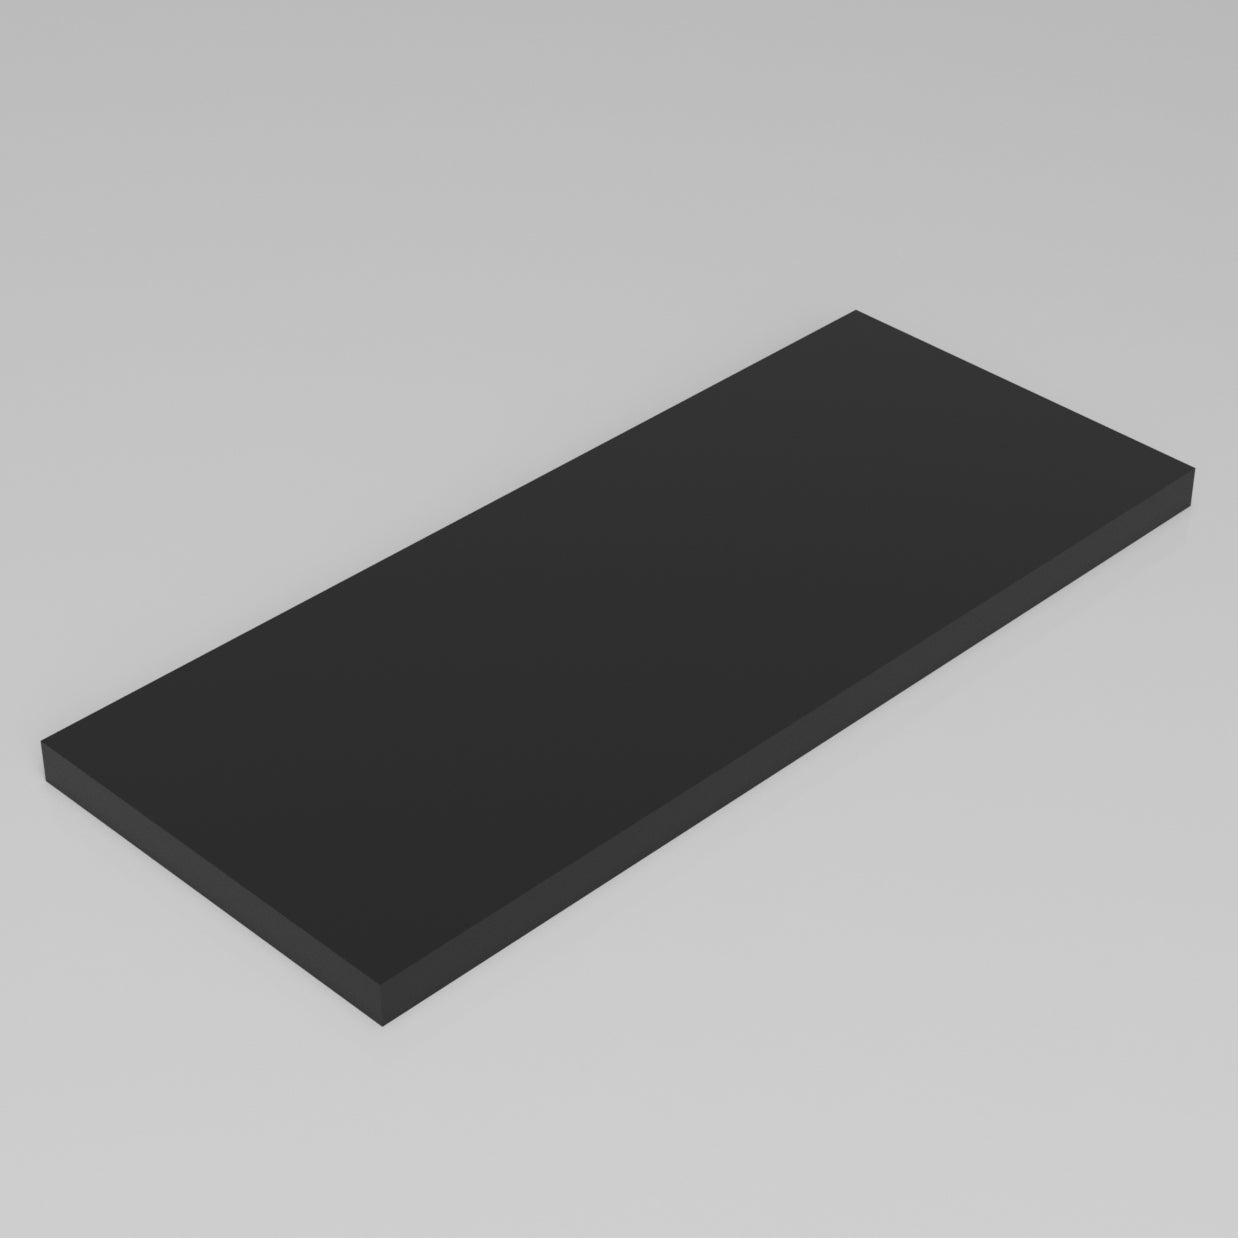 Machinable Wax Rectangular Block Front View 1 Inch by 10 Inch by 24 Inch